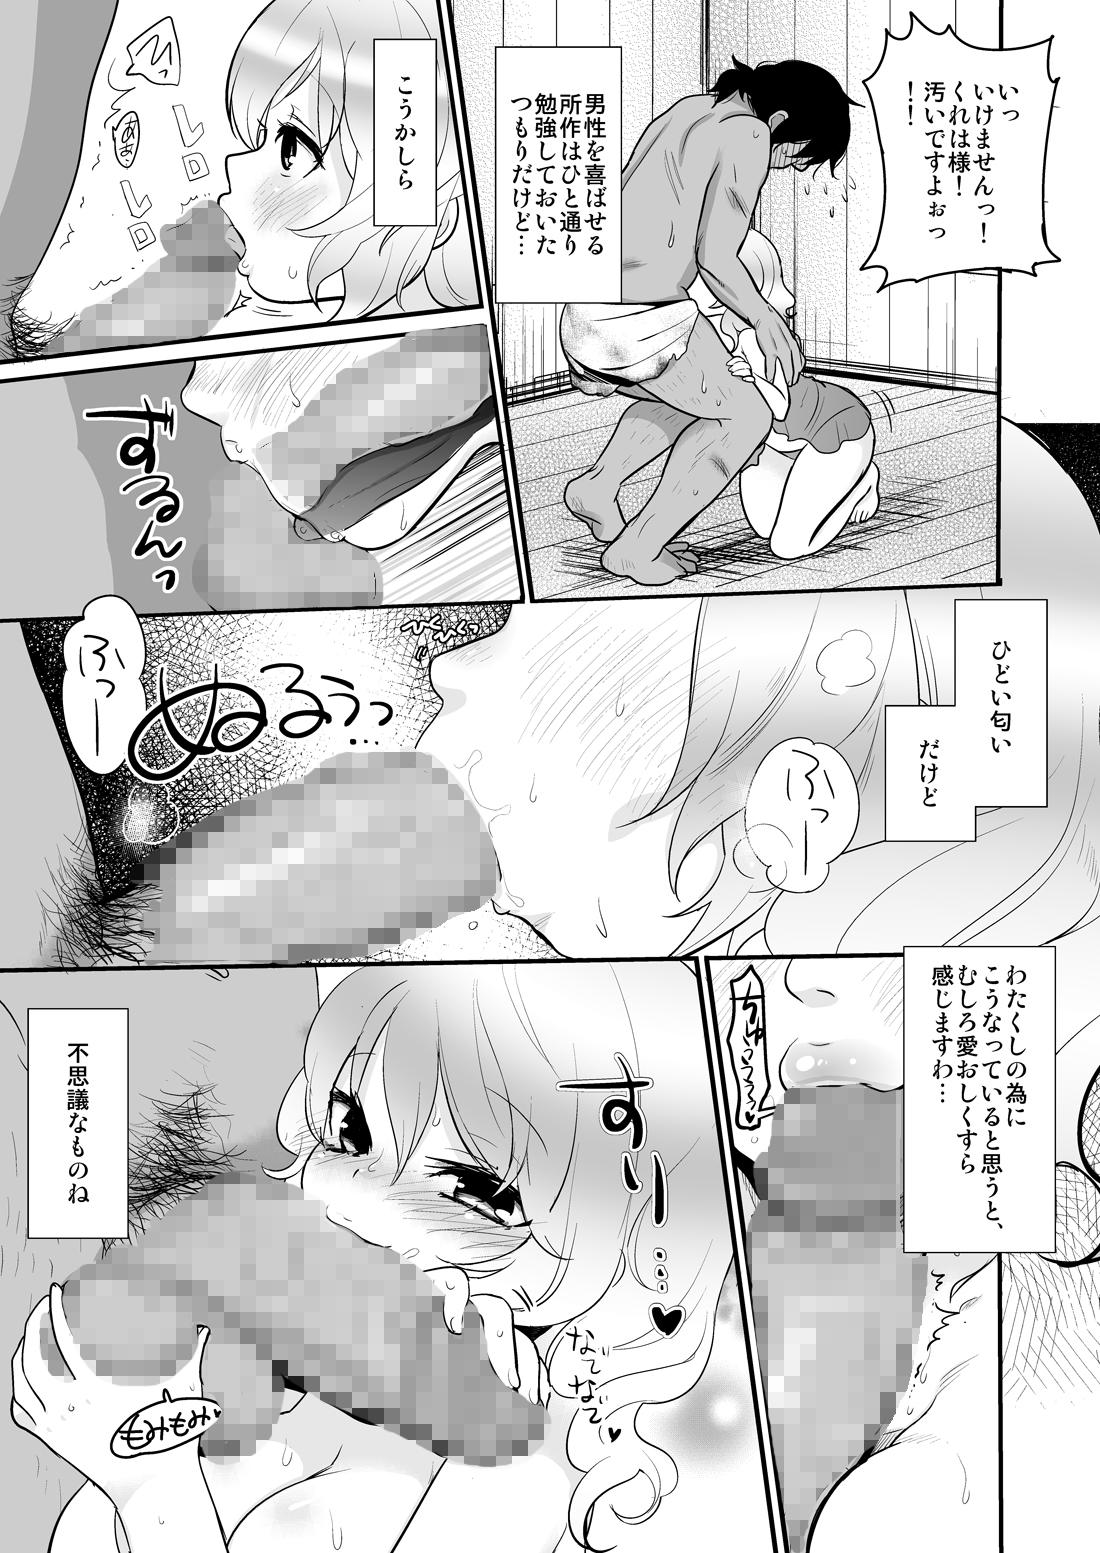 Show 無人島で遭難 Hot Wife - Page 7